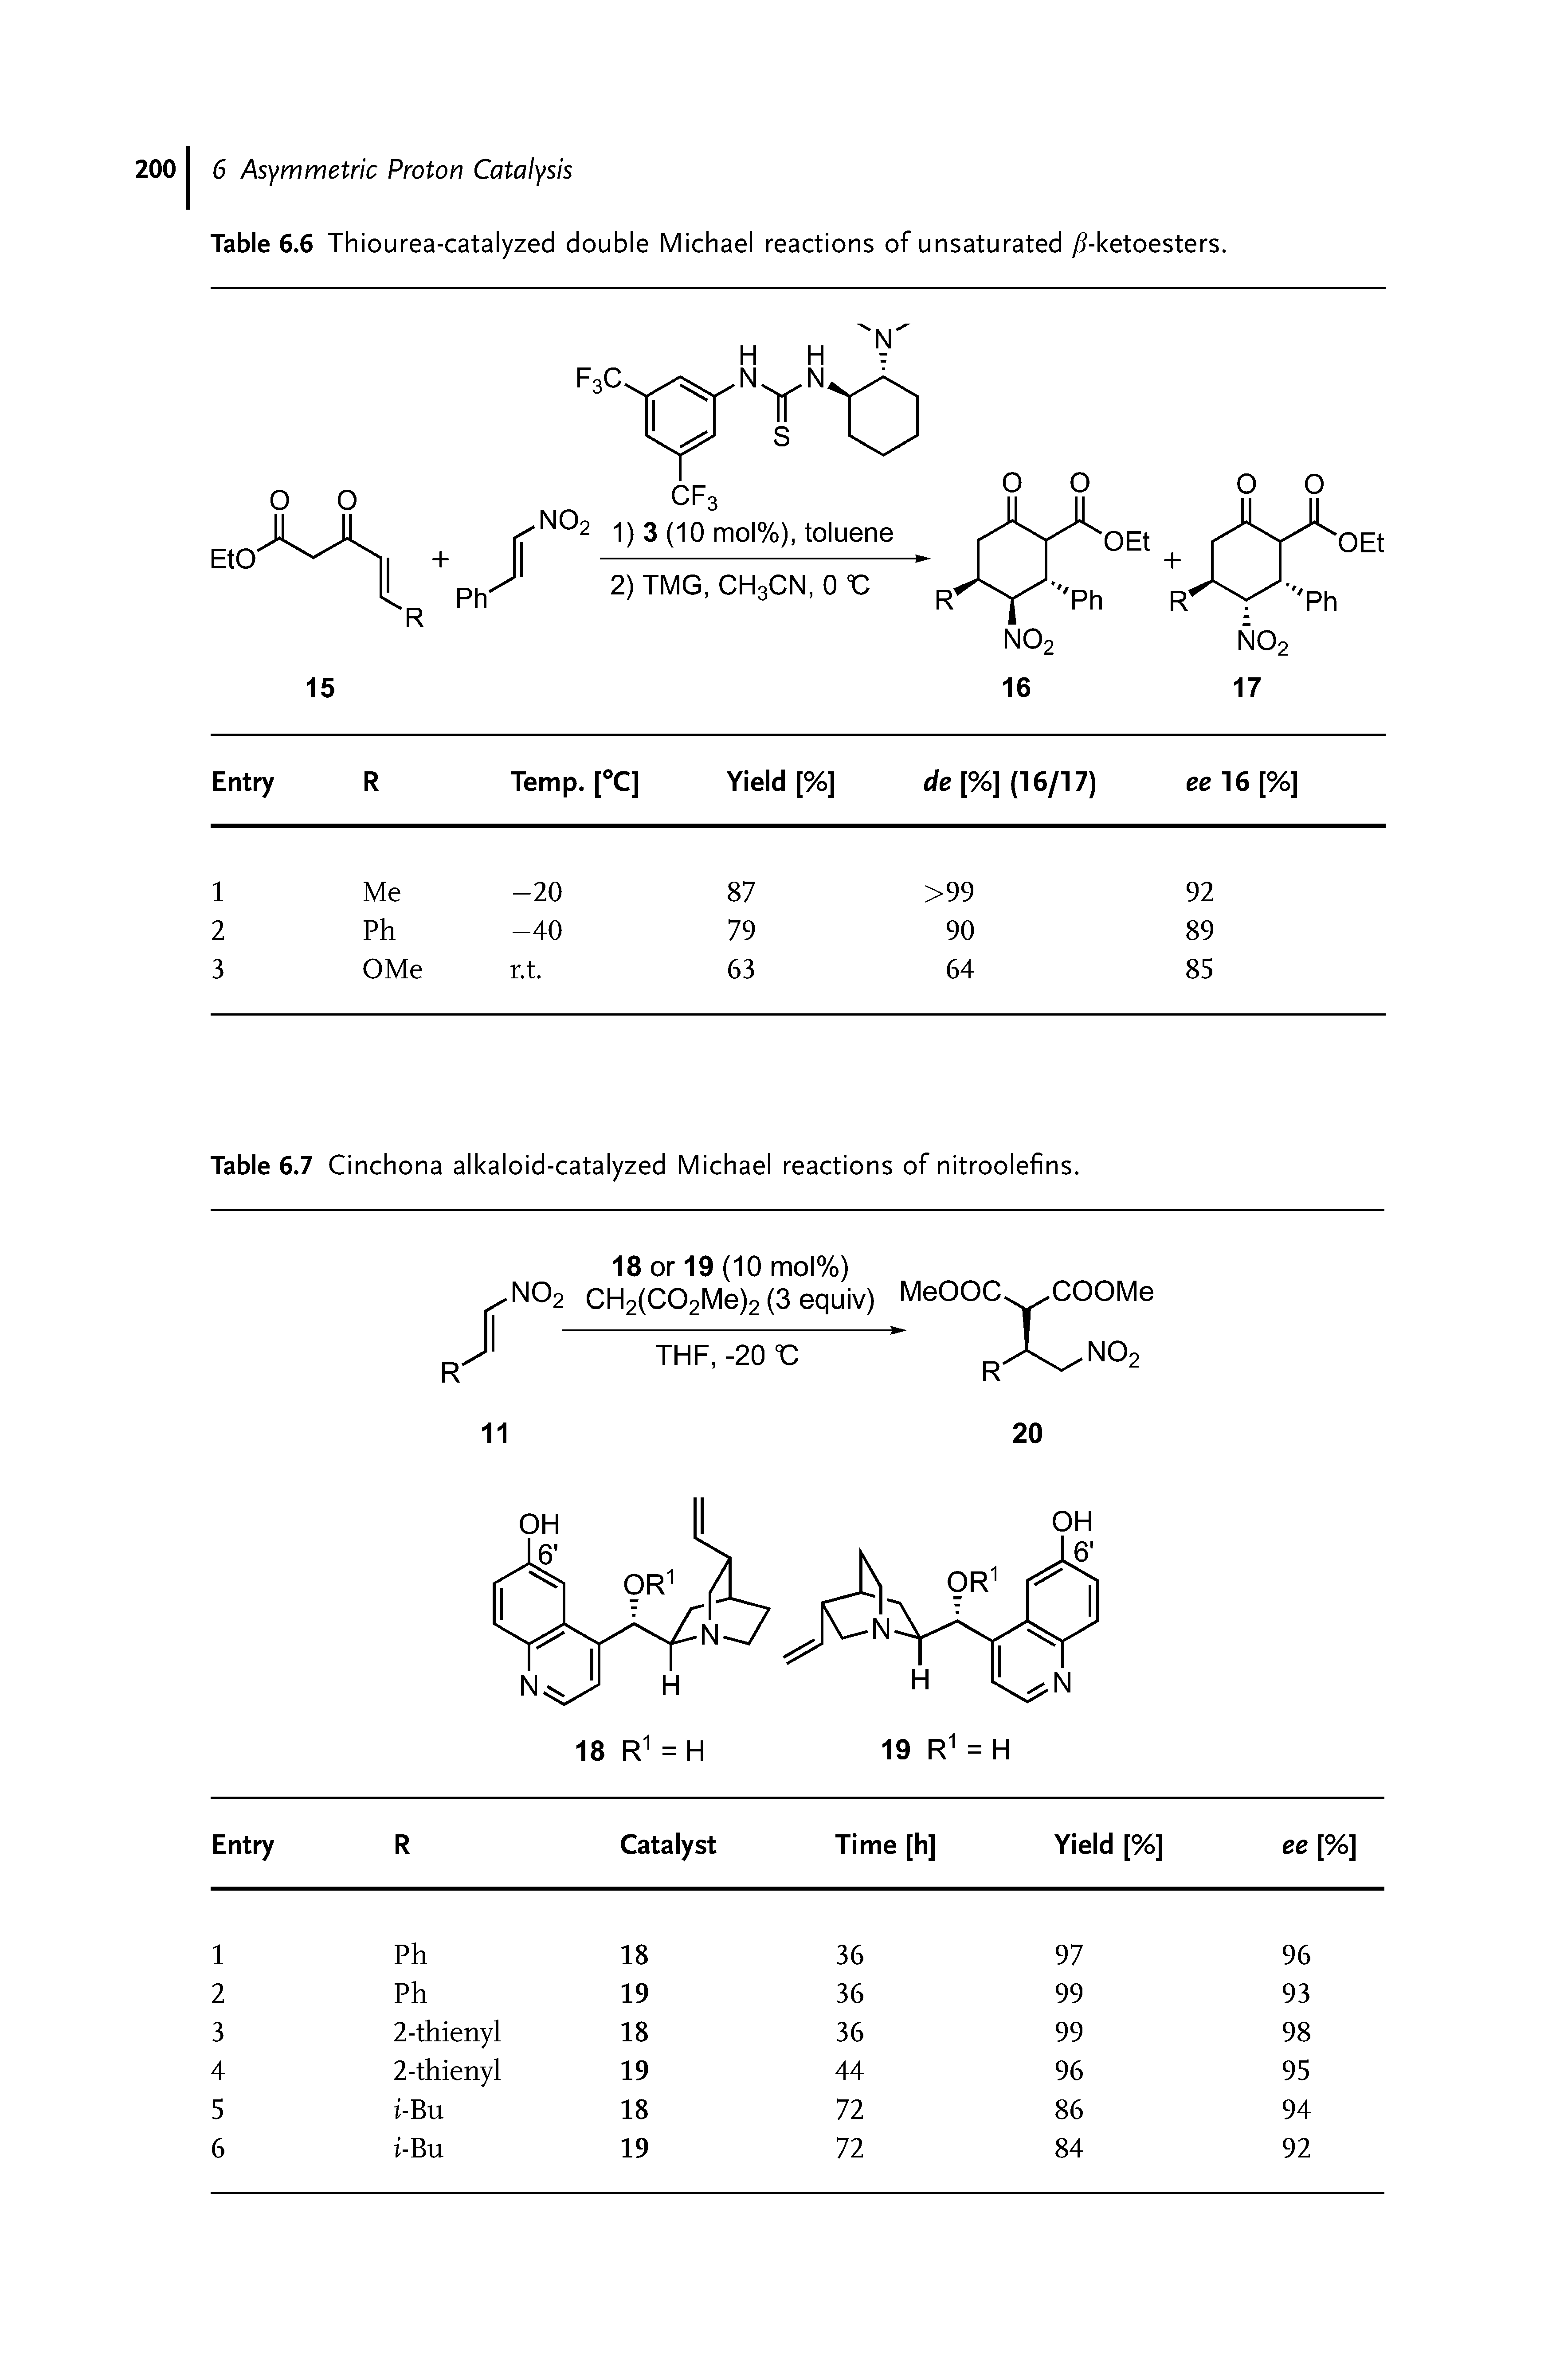 Table 6.6 Thiourea-catalyzed double Michael reactions of unsaturated /M<etoesters.